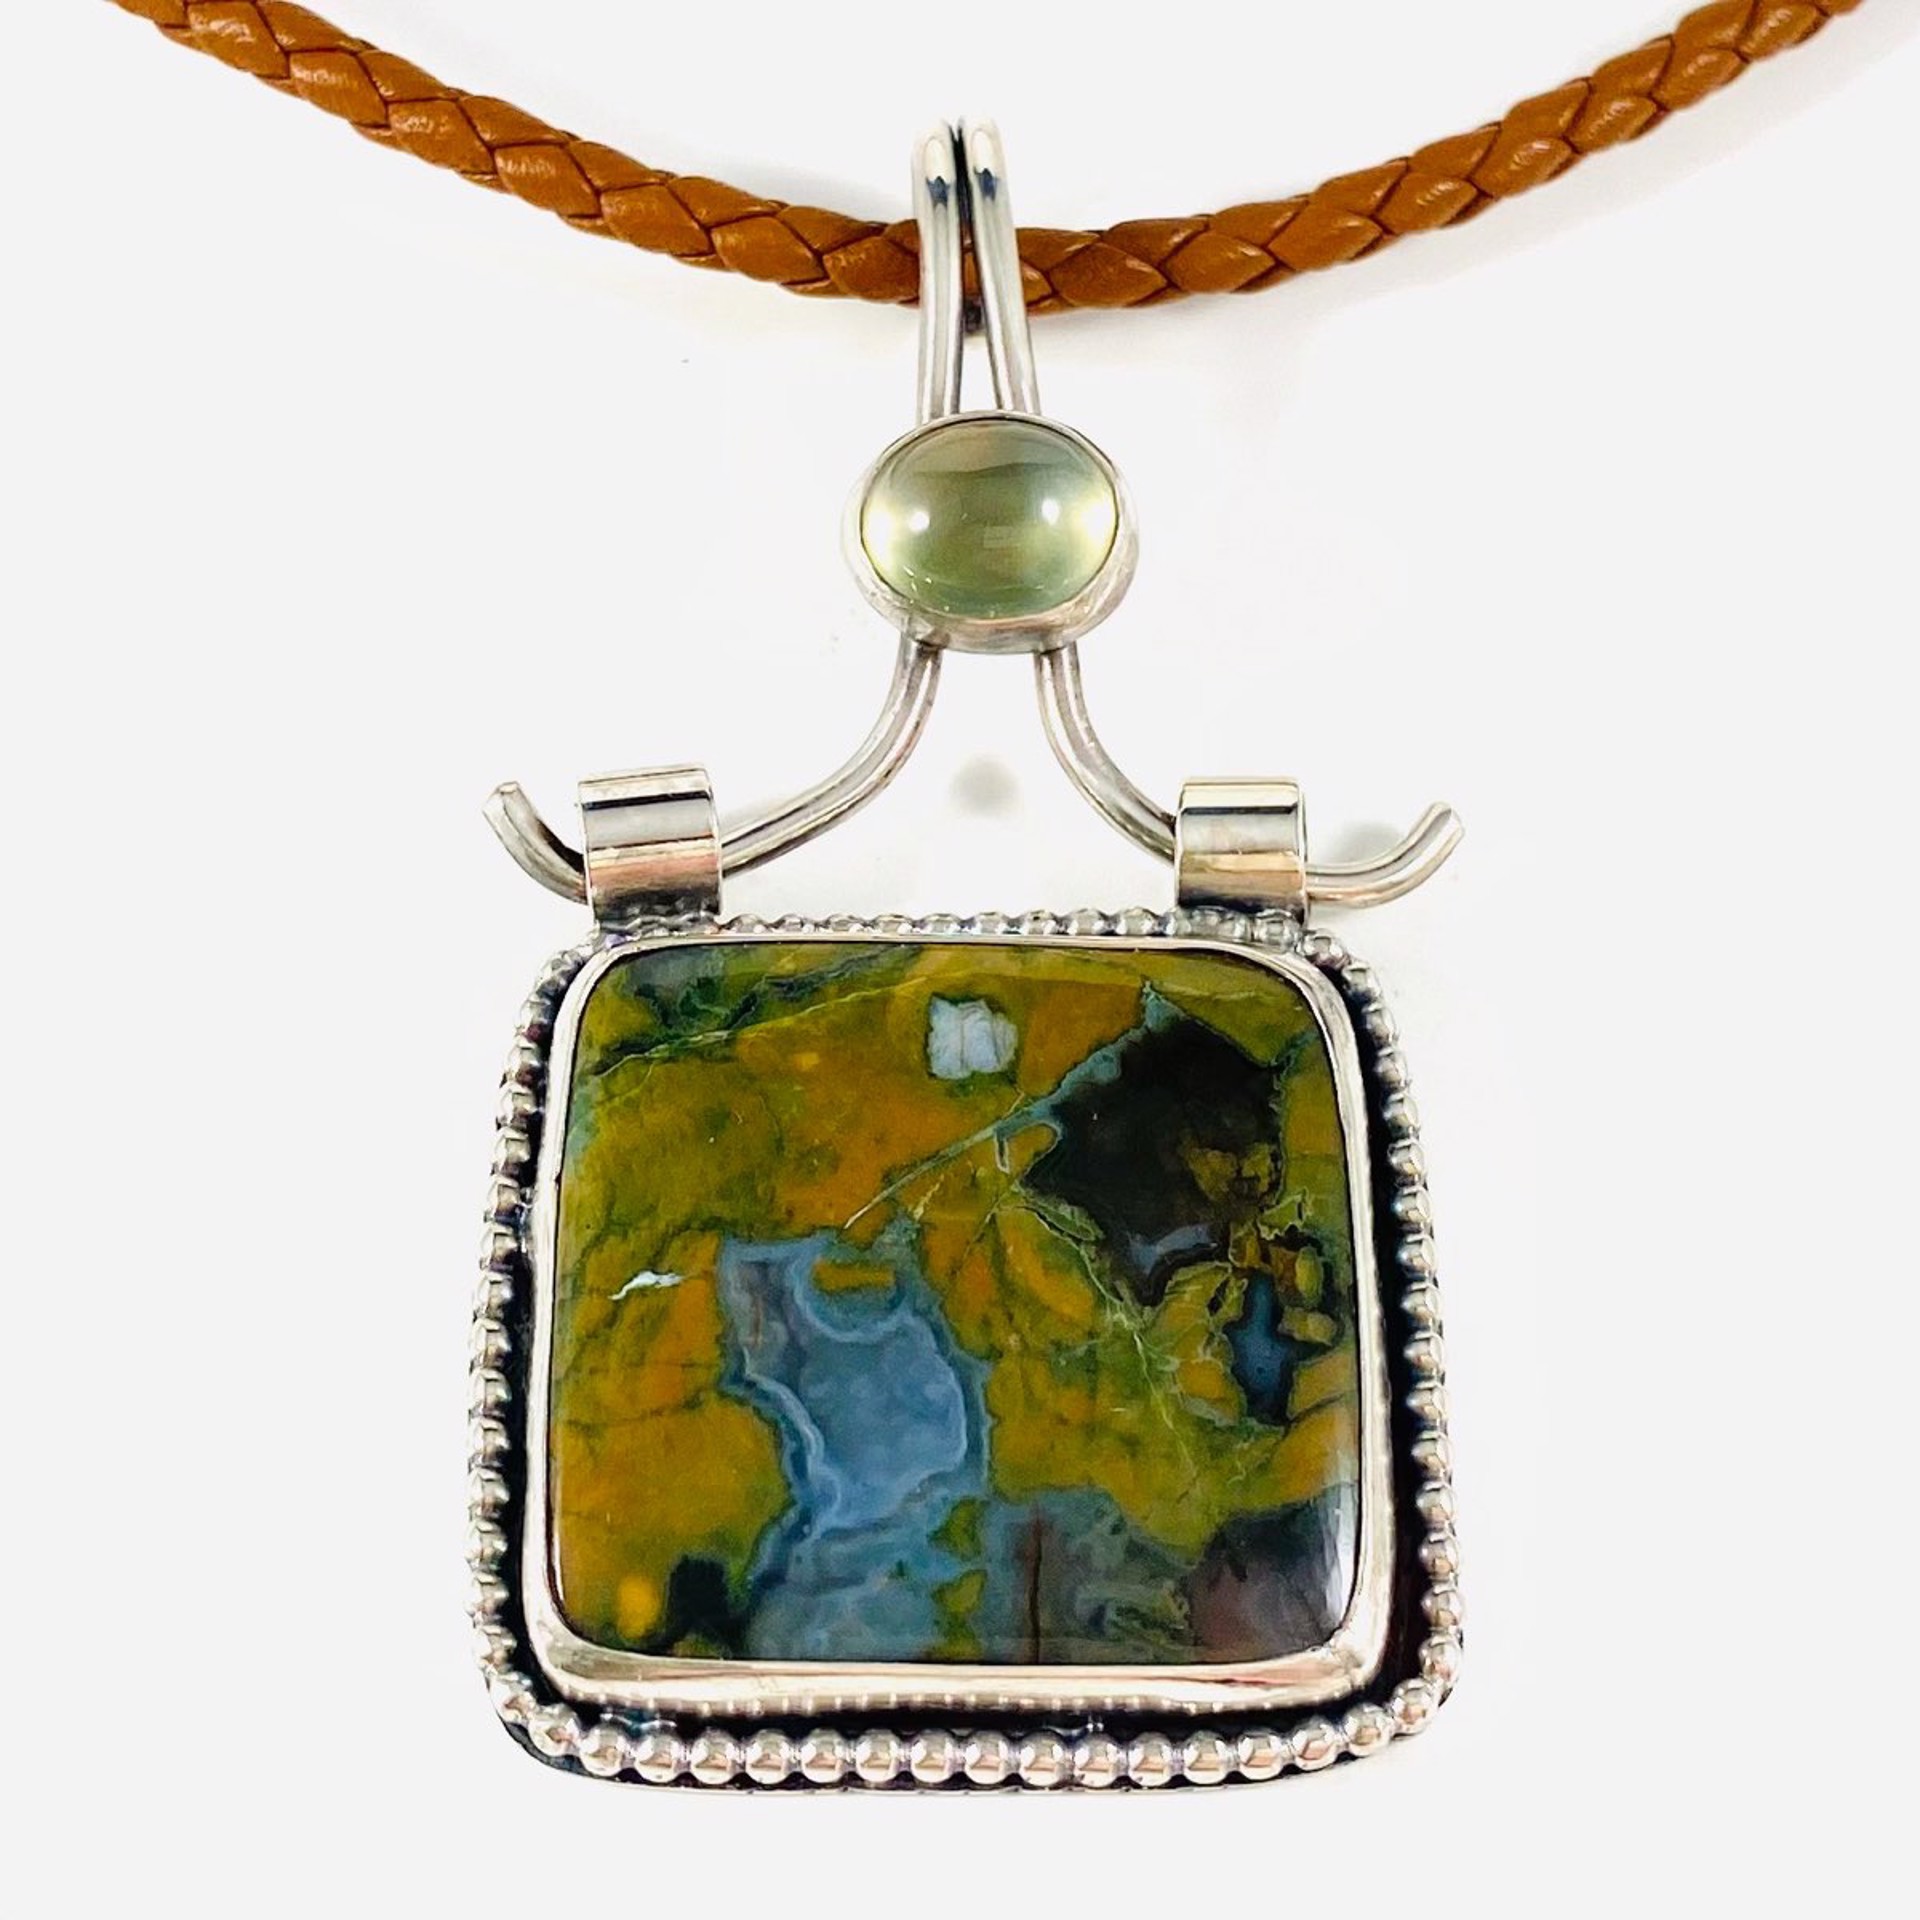 Square Rain Forest Jasper with beaded bezel Oval Prenite 3" Pendant on Braided Leather Necklace AB22-95 by Anne Bivens